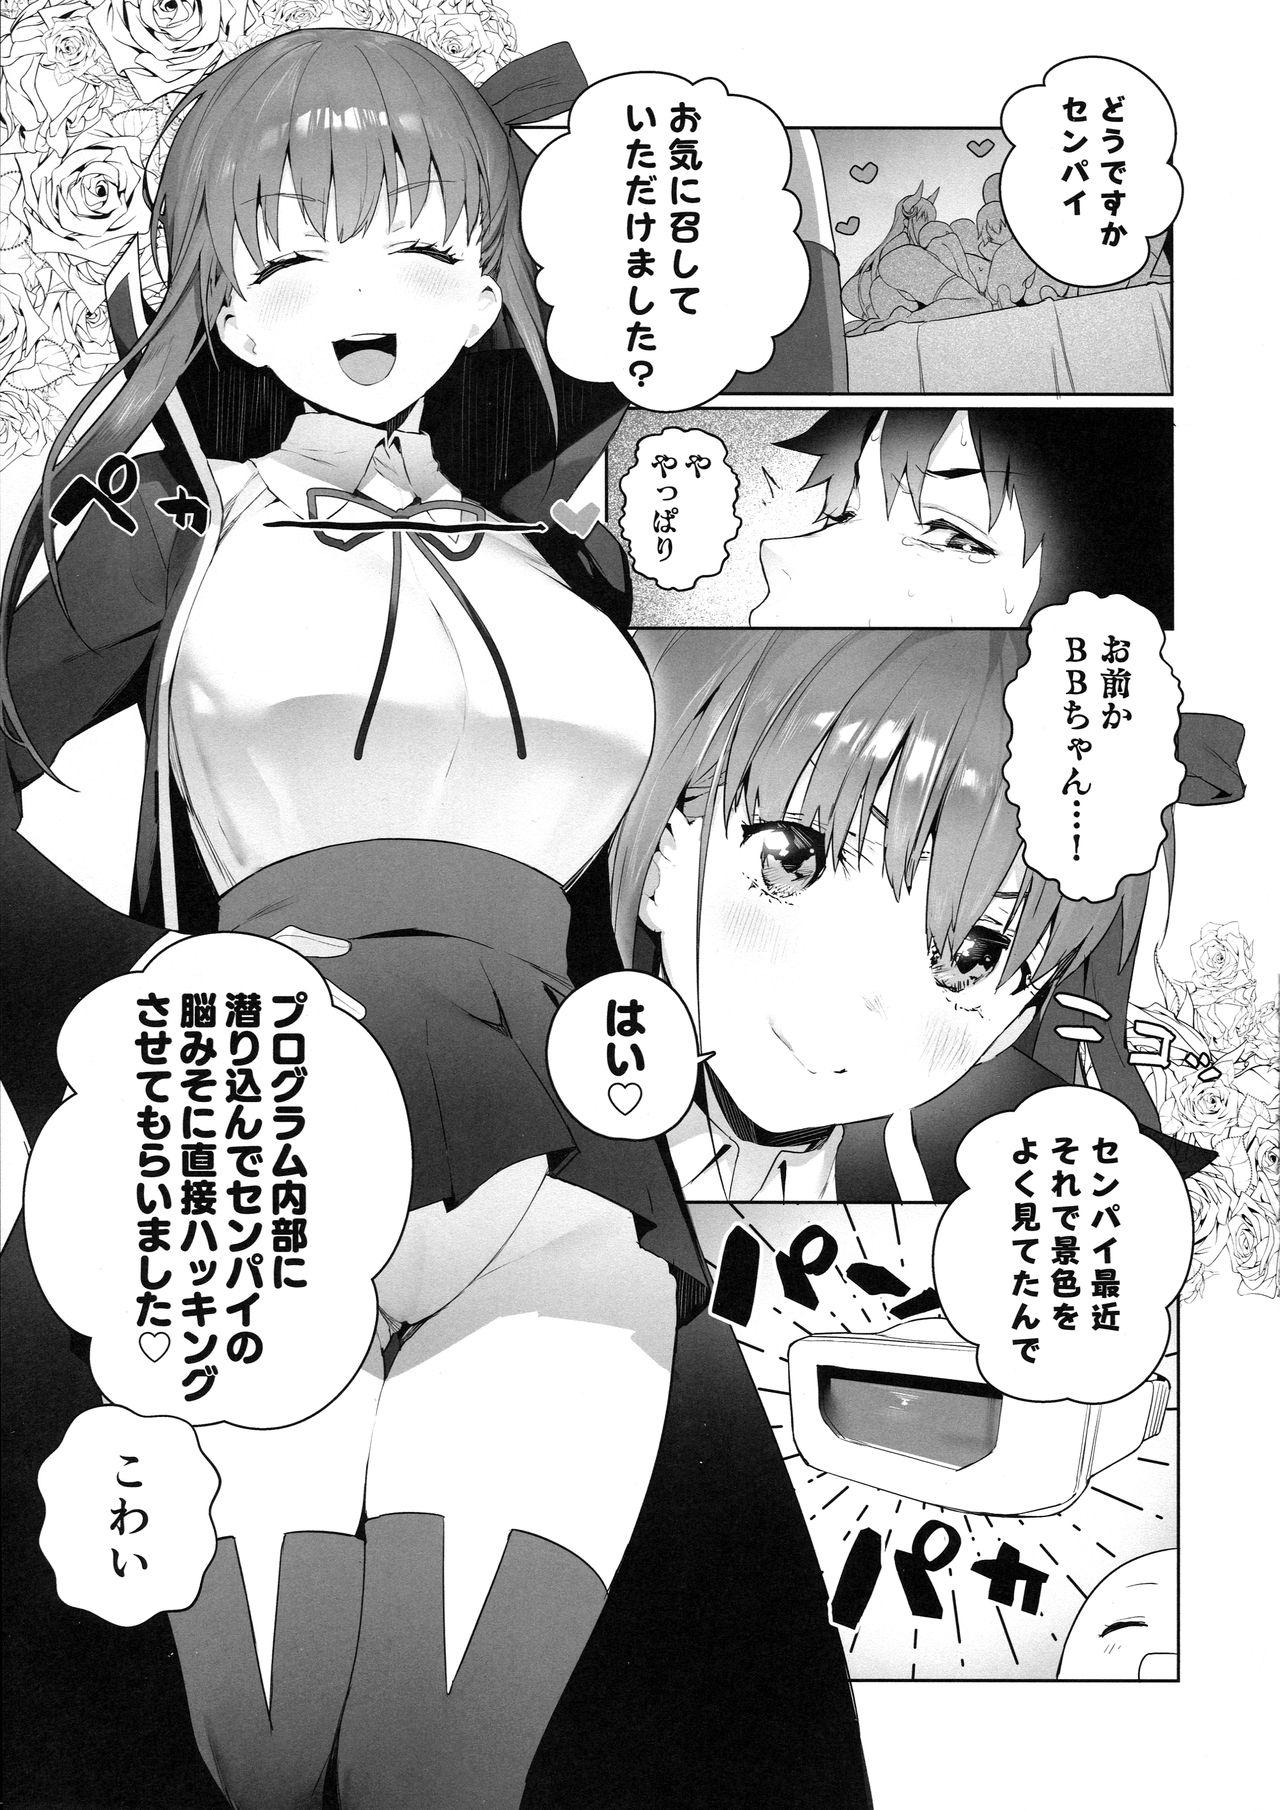 Interracial LOVELESS - Fate grand order Tribbing - Page 4